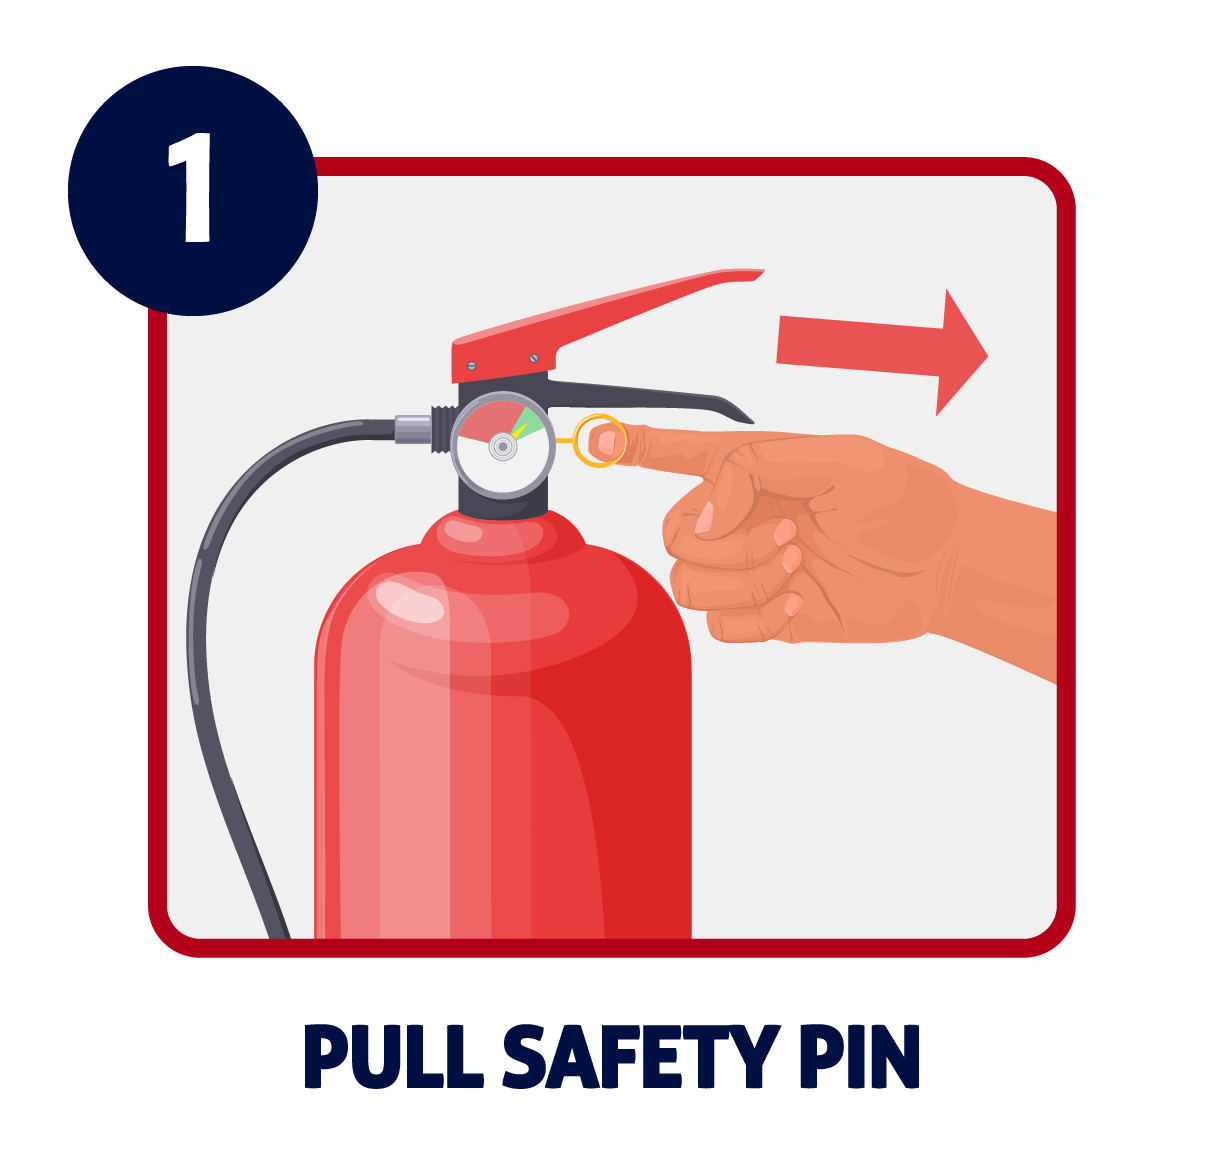 fire extinguisher instructional graphic with a cartoon hand pulling the safety pin of a fire extinguisher